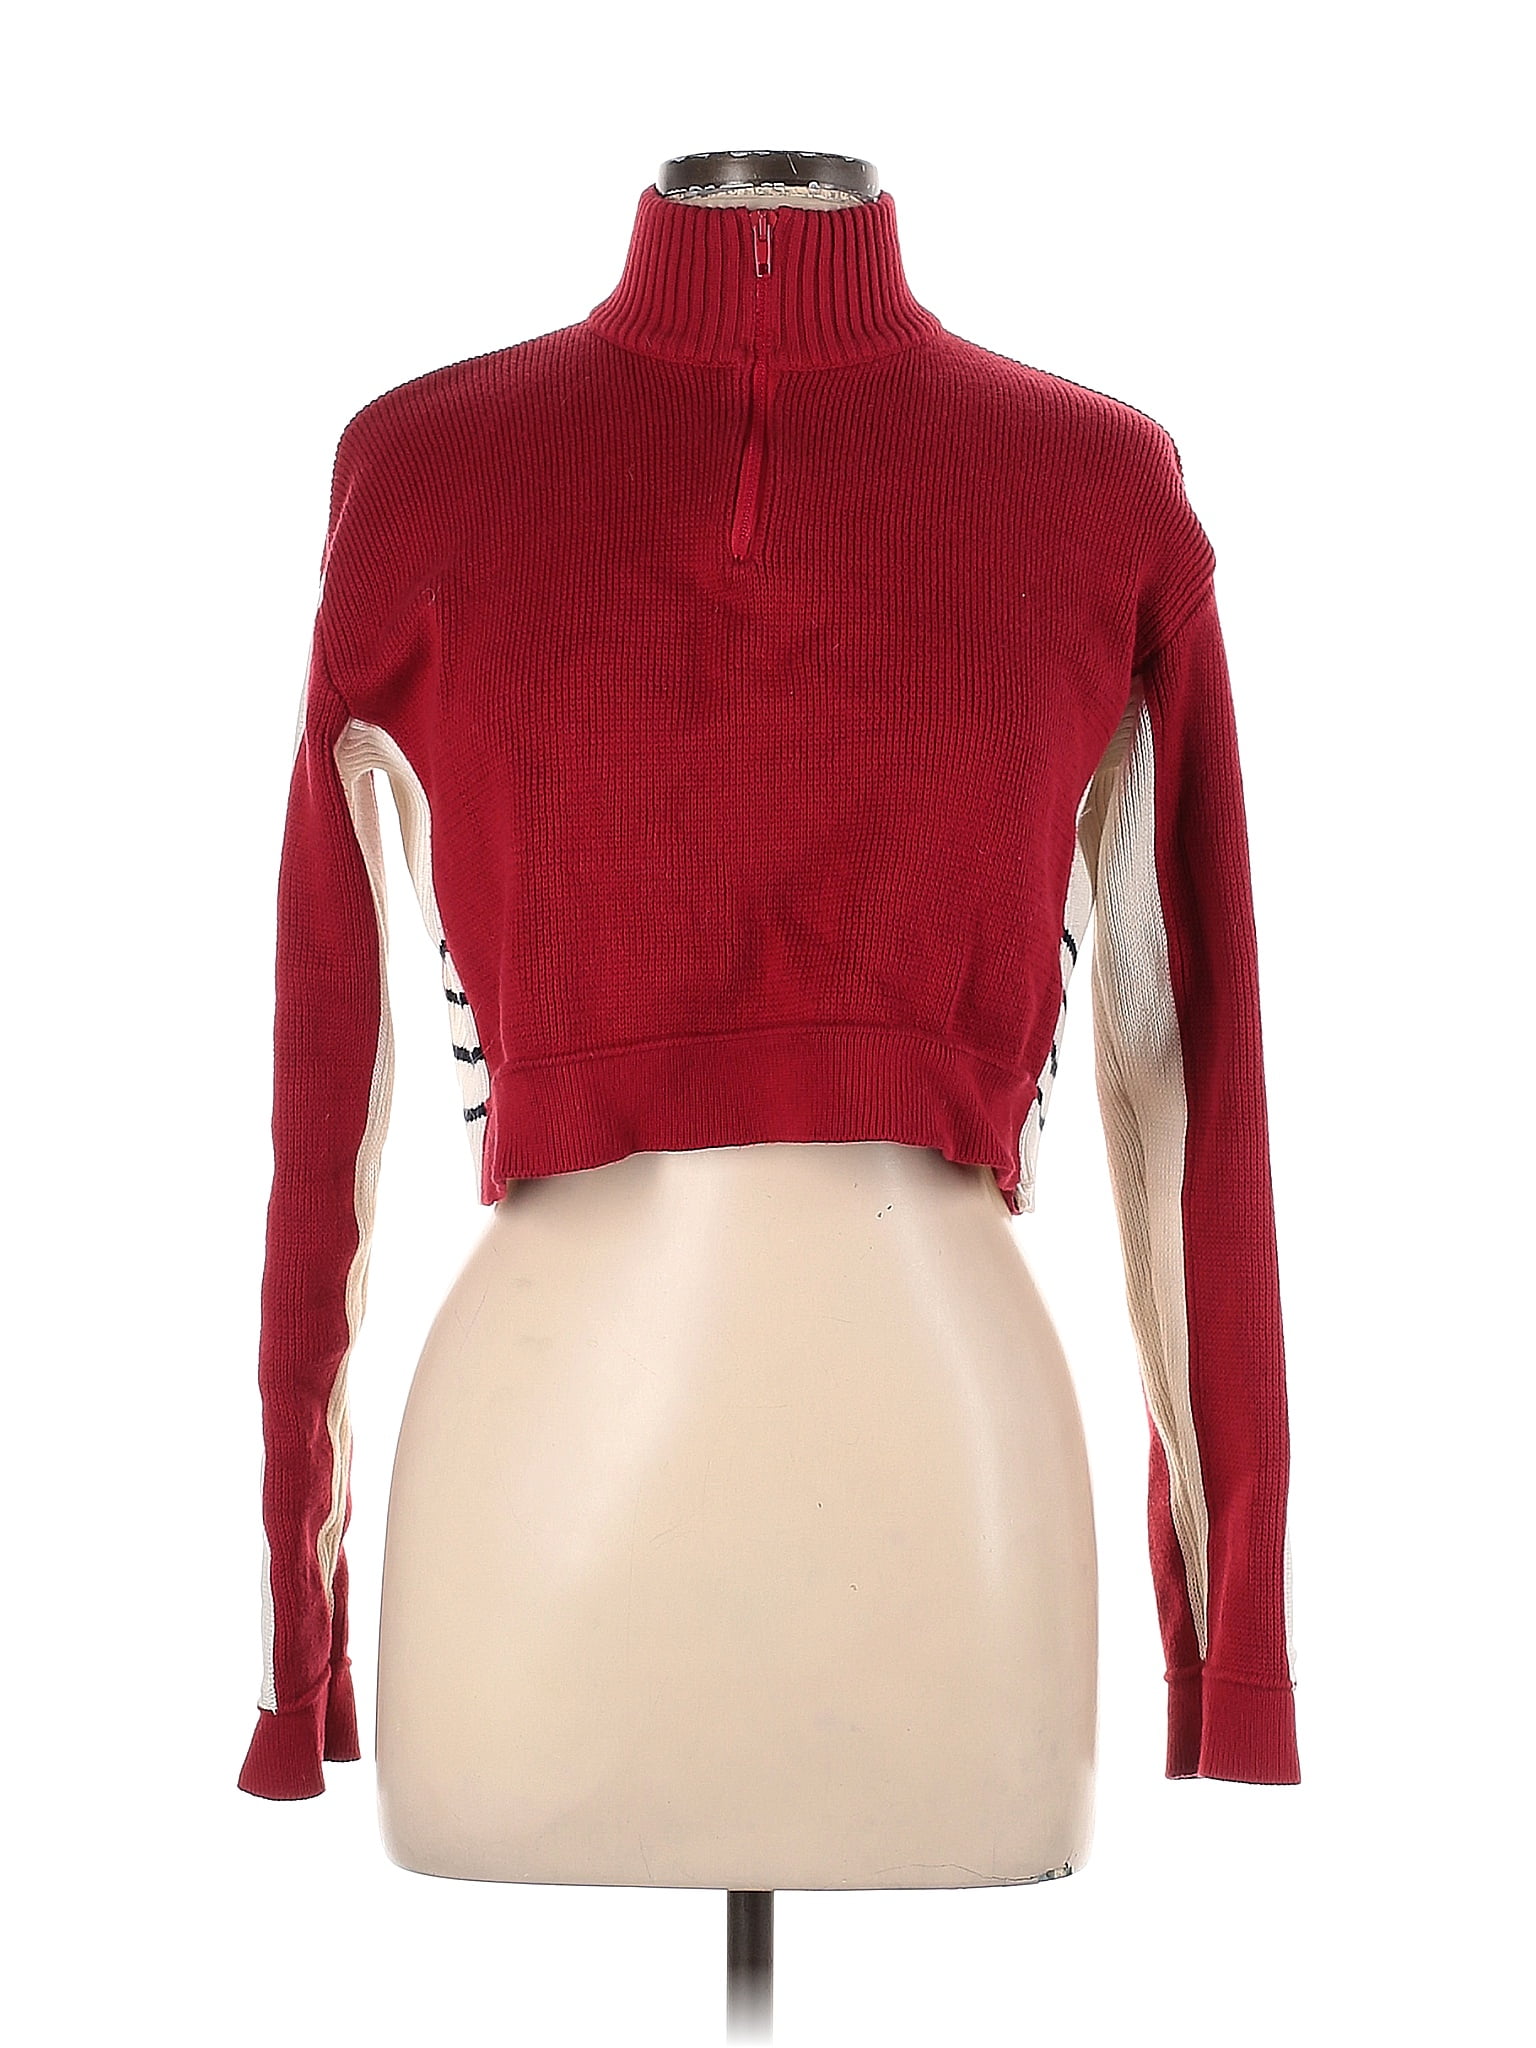 BRANDY MELVILLE Colorblock Red White Cropped Long Sleeve Pullover